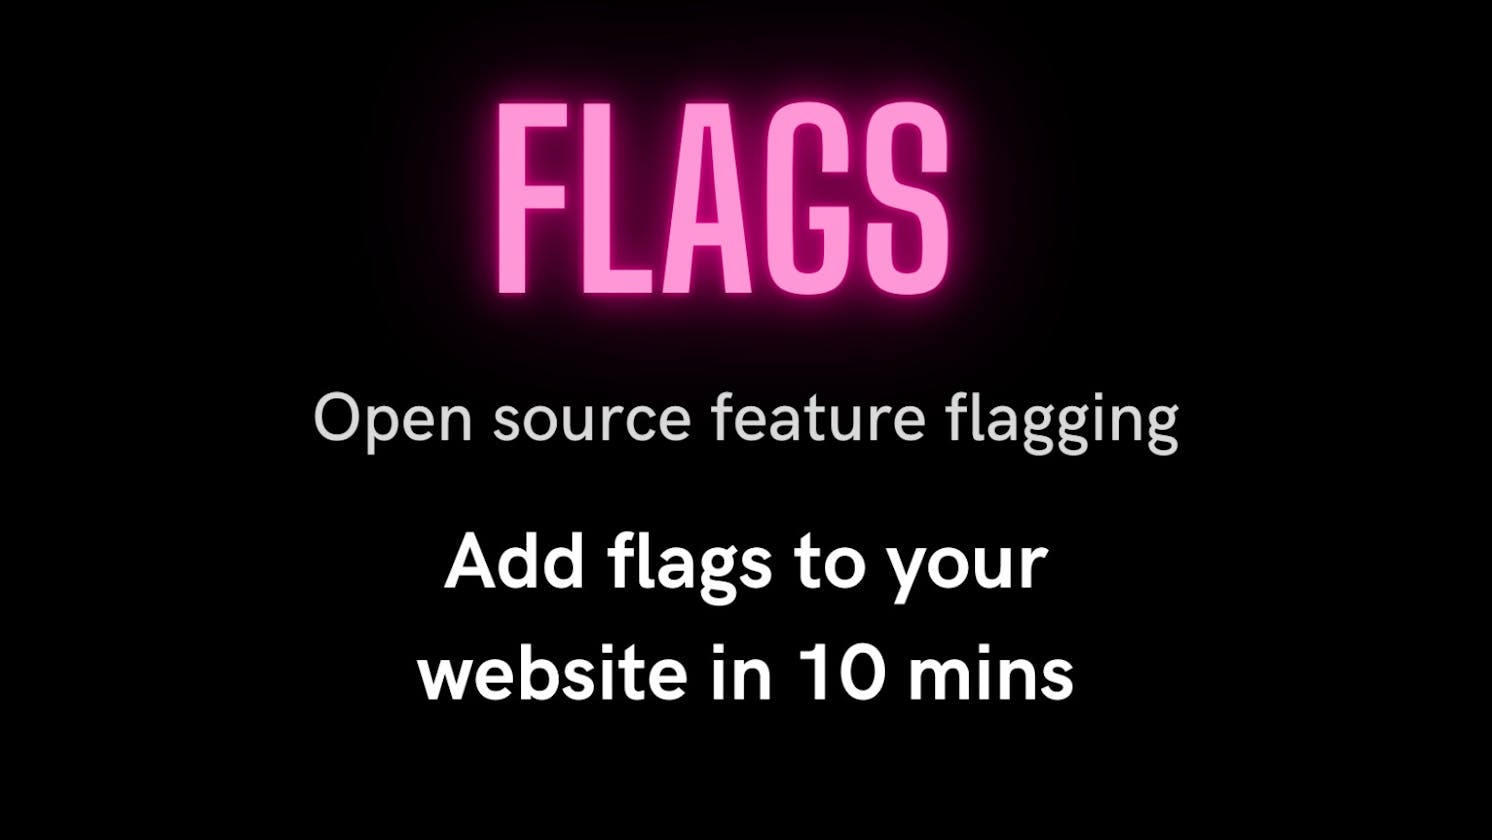 Flags: Open source feature flag management software